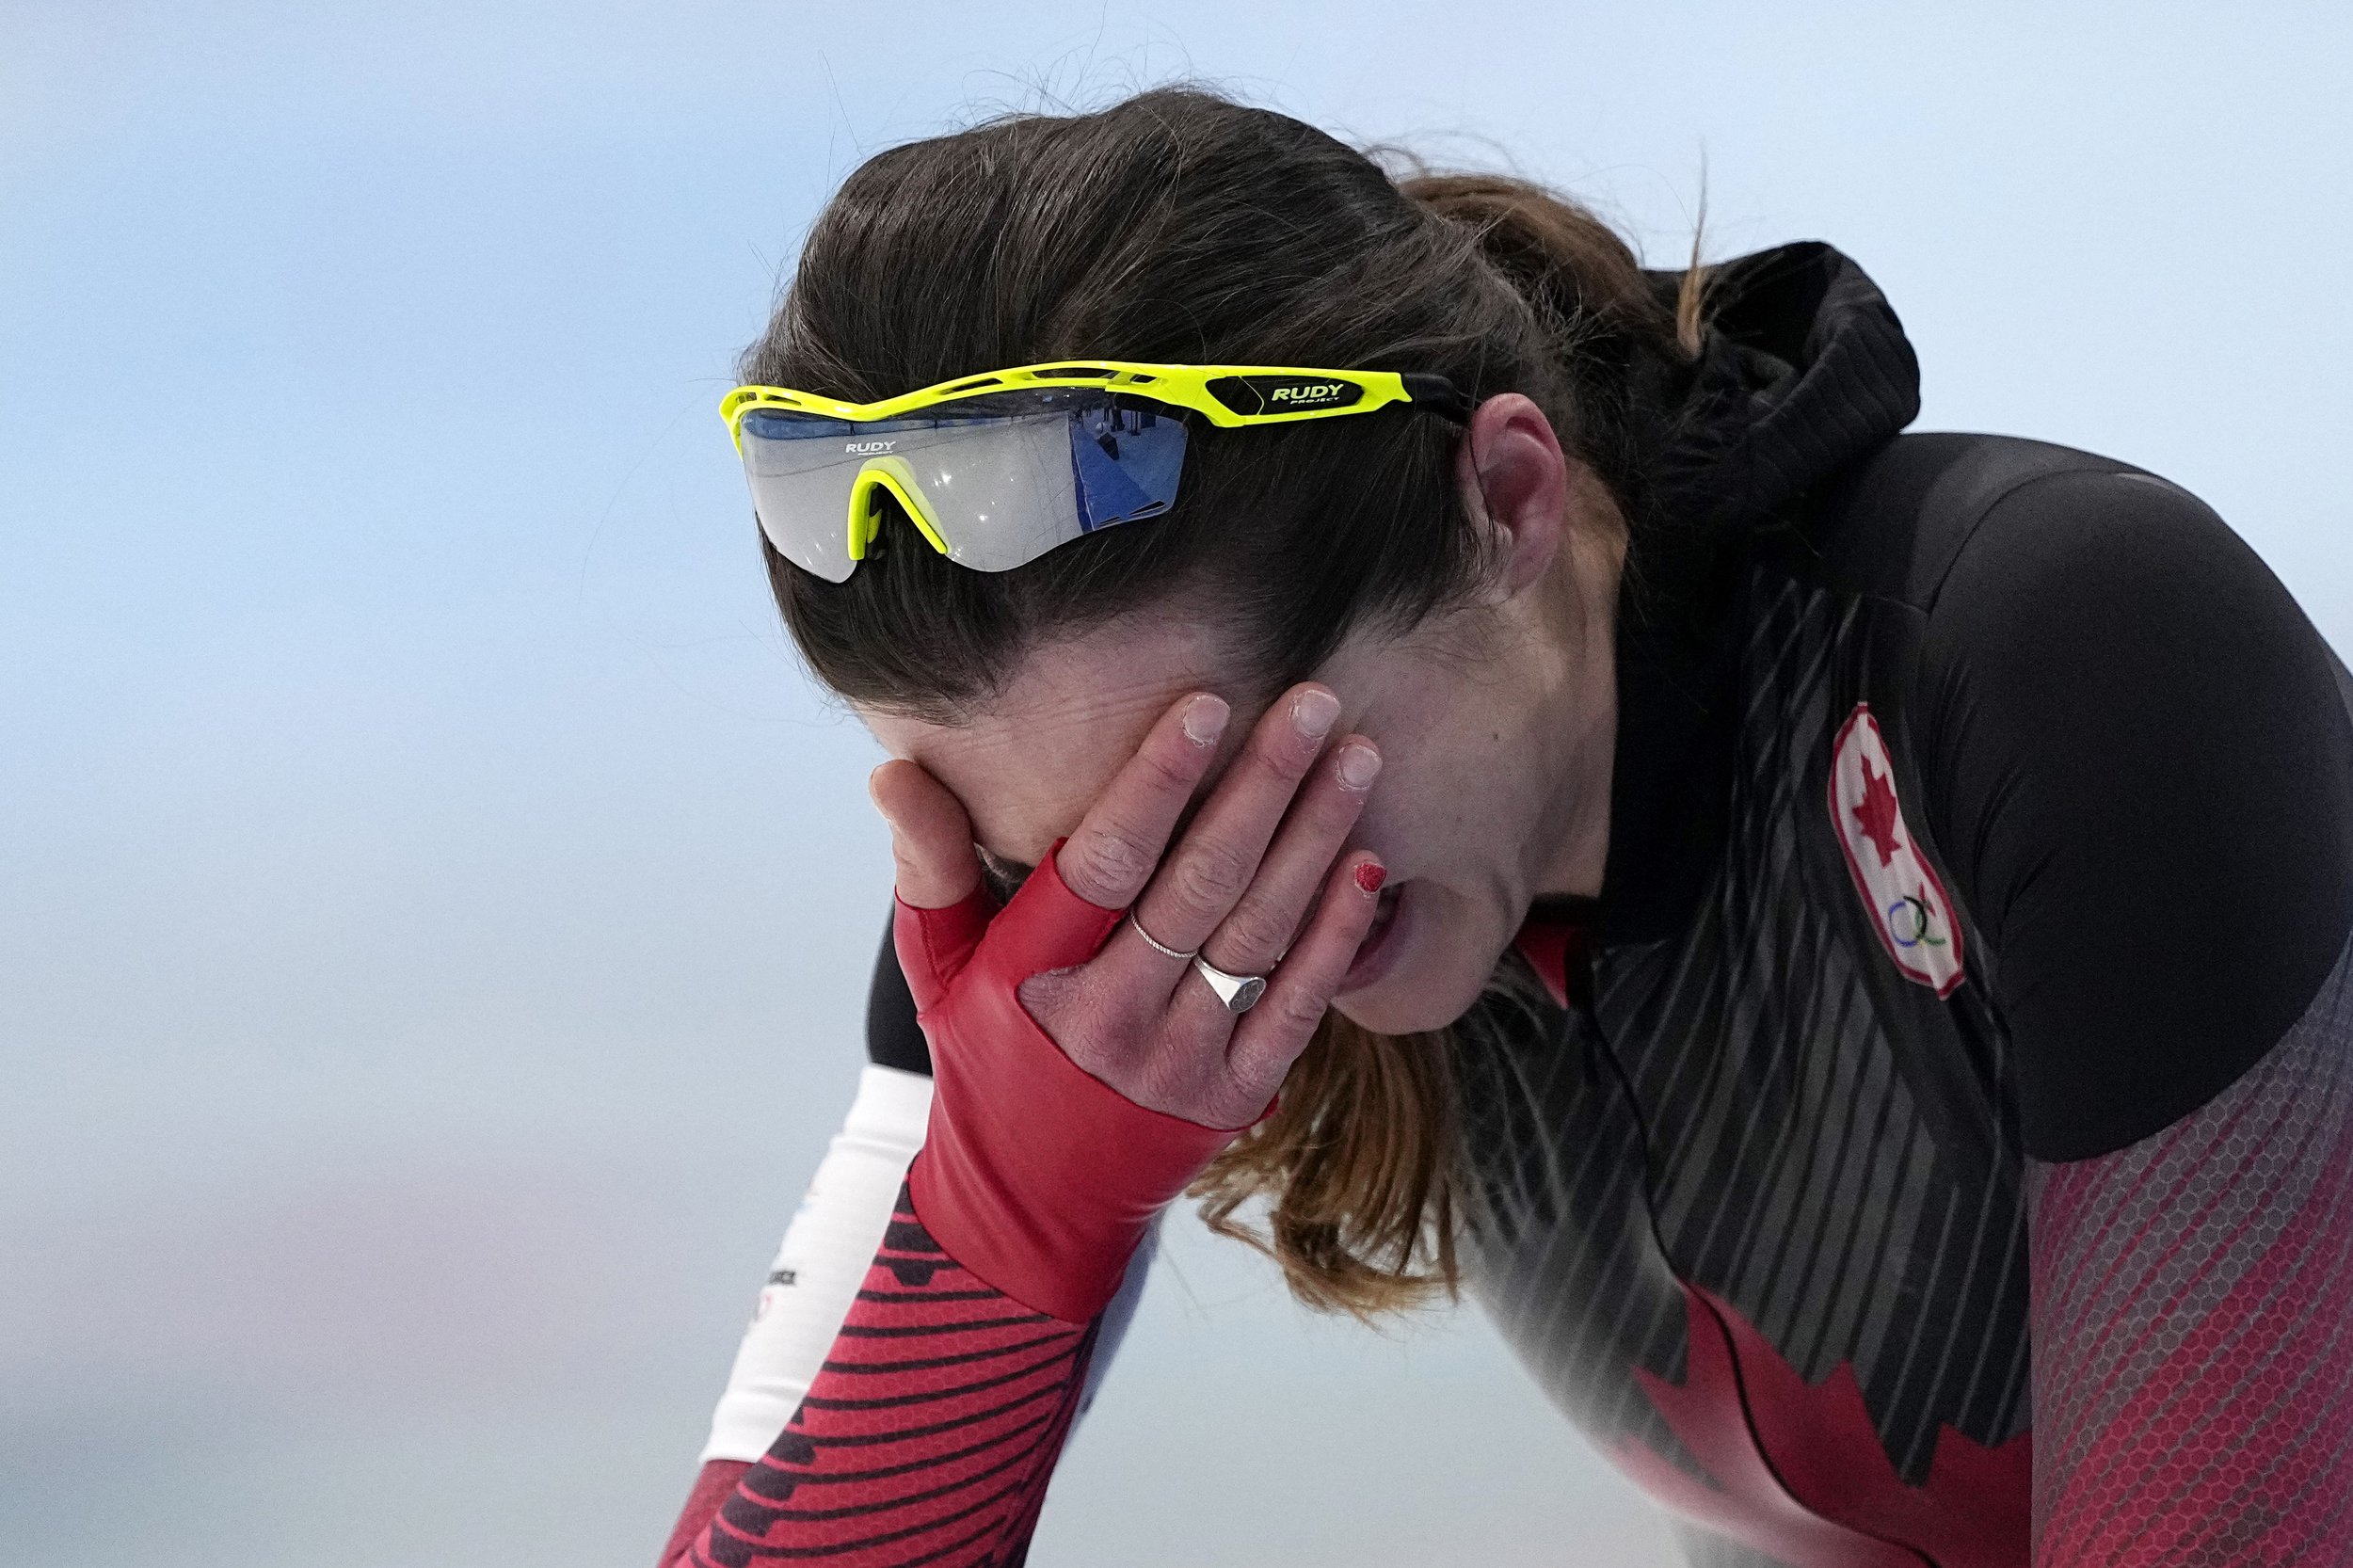  Isabelle Weidemann of Canada reacts after her heat in the women's speedskating 5,000-meter race at the 2022 Winter Olympics, Thursday, Feb. 10, 2022, in Beijing. (AP Photo/Sue Ogrocki) 